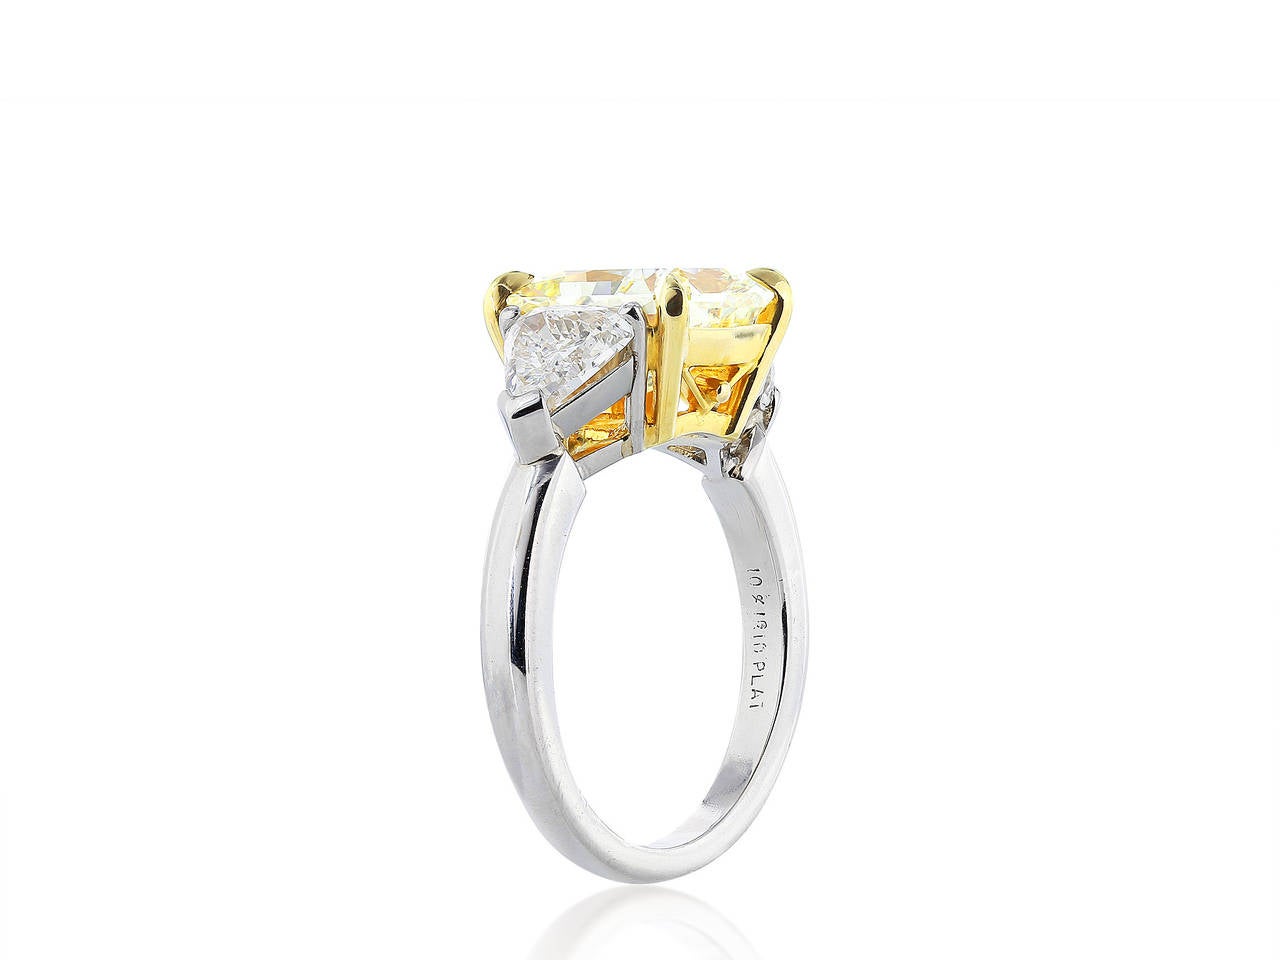 Platinum and 18 karat yellow gold custom made 3 stone ring consisting of 1 radiant cut, natural canary diamond center stone weighing 3.64 carats, with a color and clarity of fancy yellow/VS2, measuring 9.21 x 8.56 x 5.16 mm, with GIA cert #15614540,